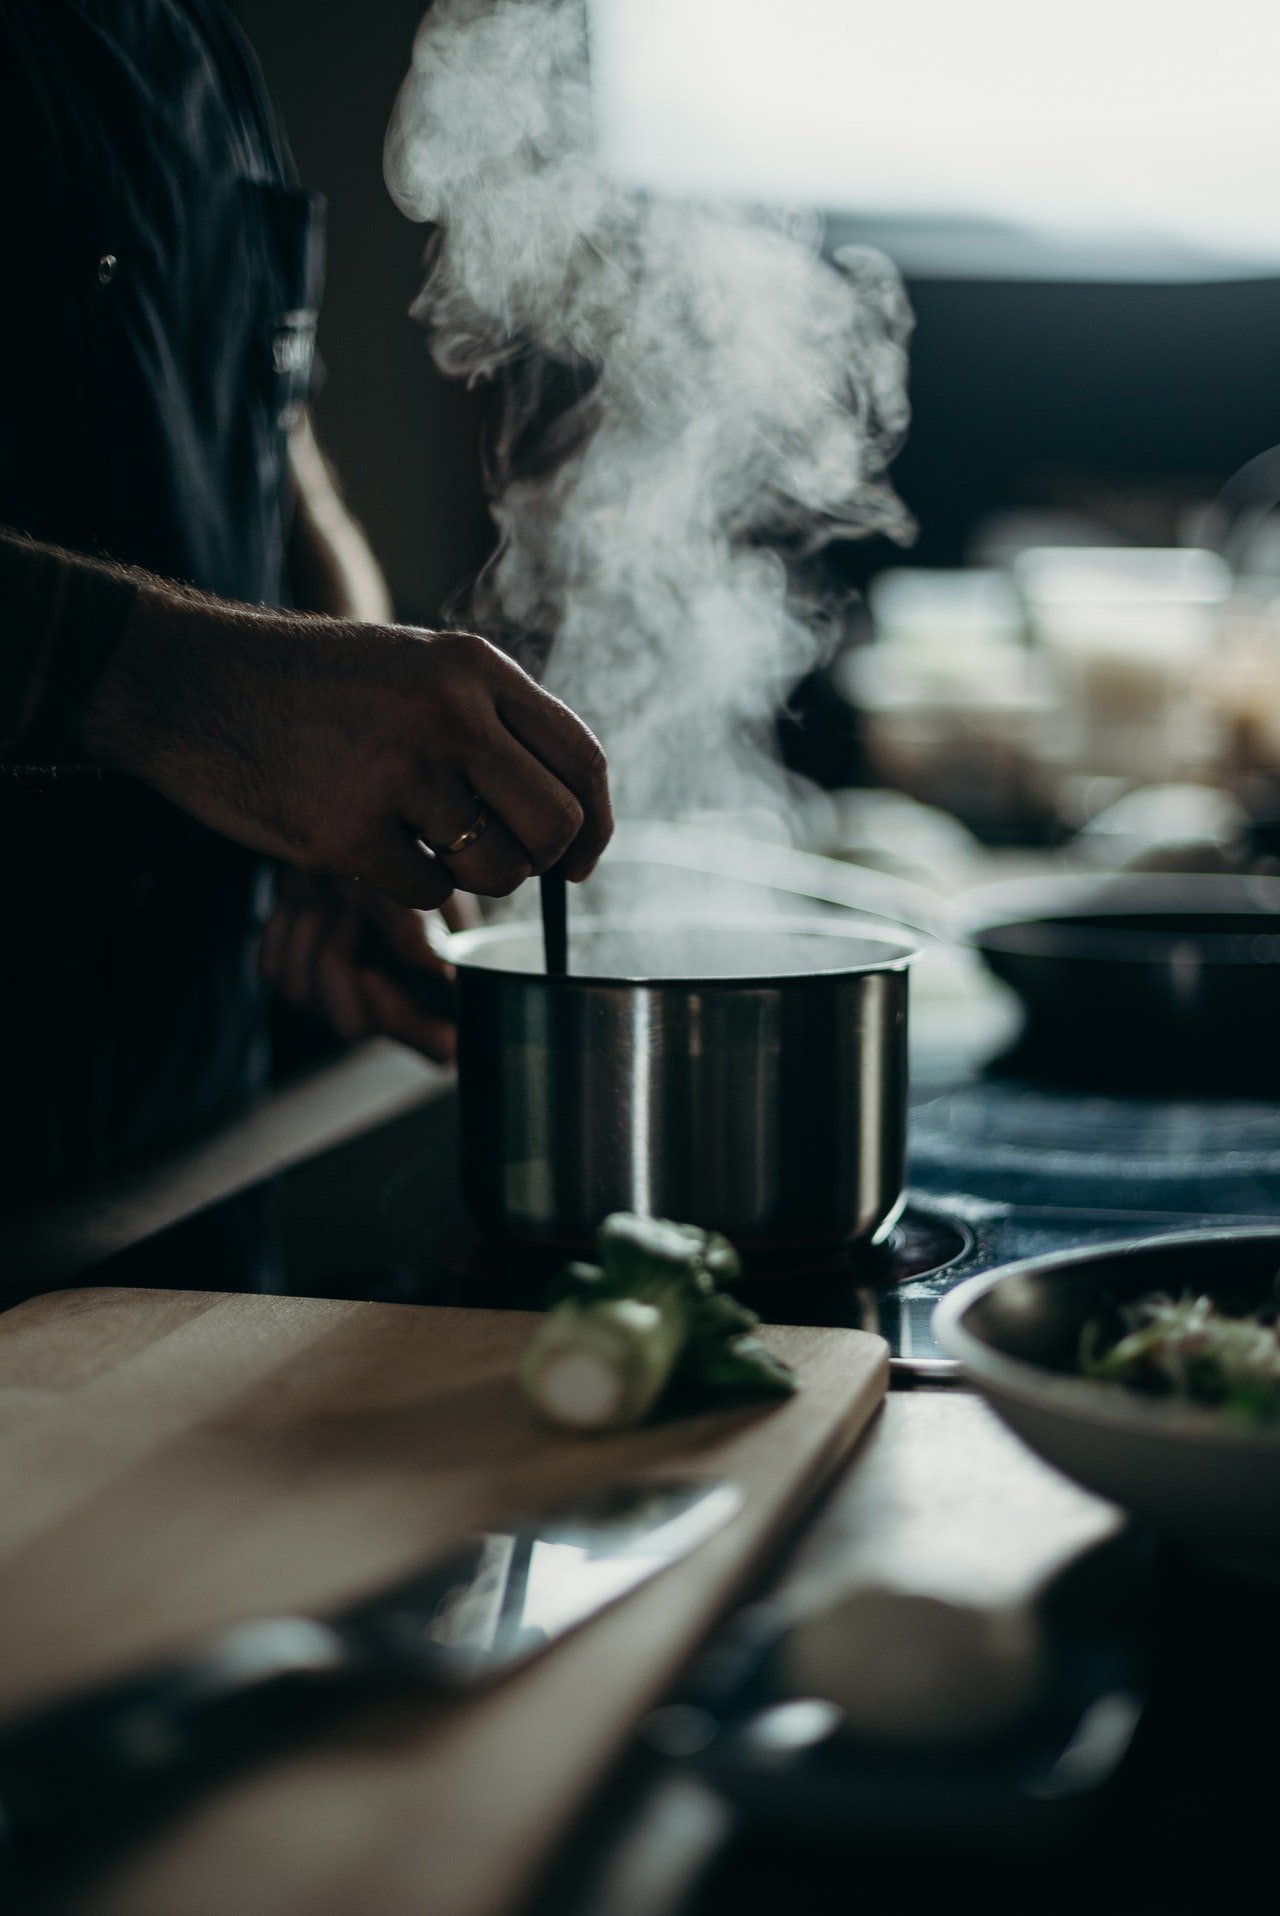 She was cooking the ramen when her daughter told her about the mail. | Source: Pexels